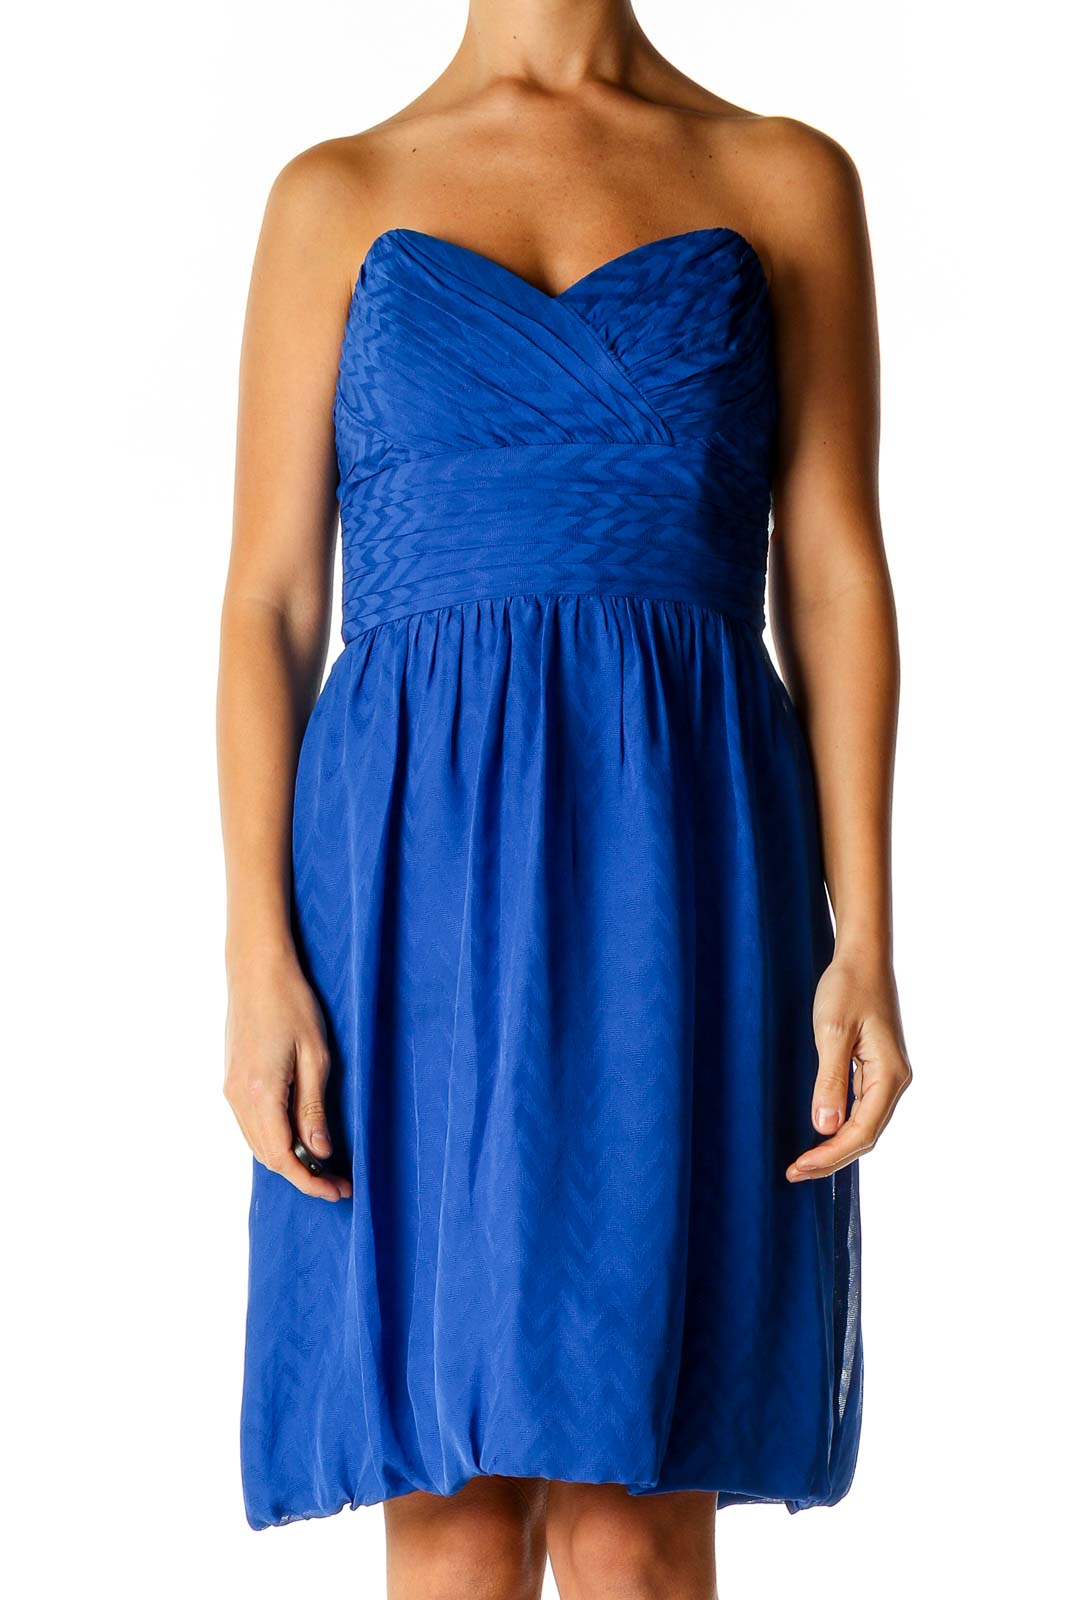 Blue Solid Cocktail Fit & Flare Dress Front